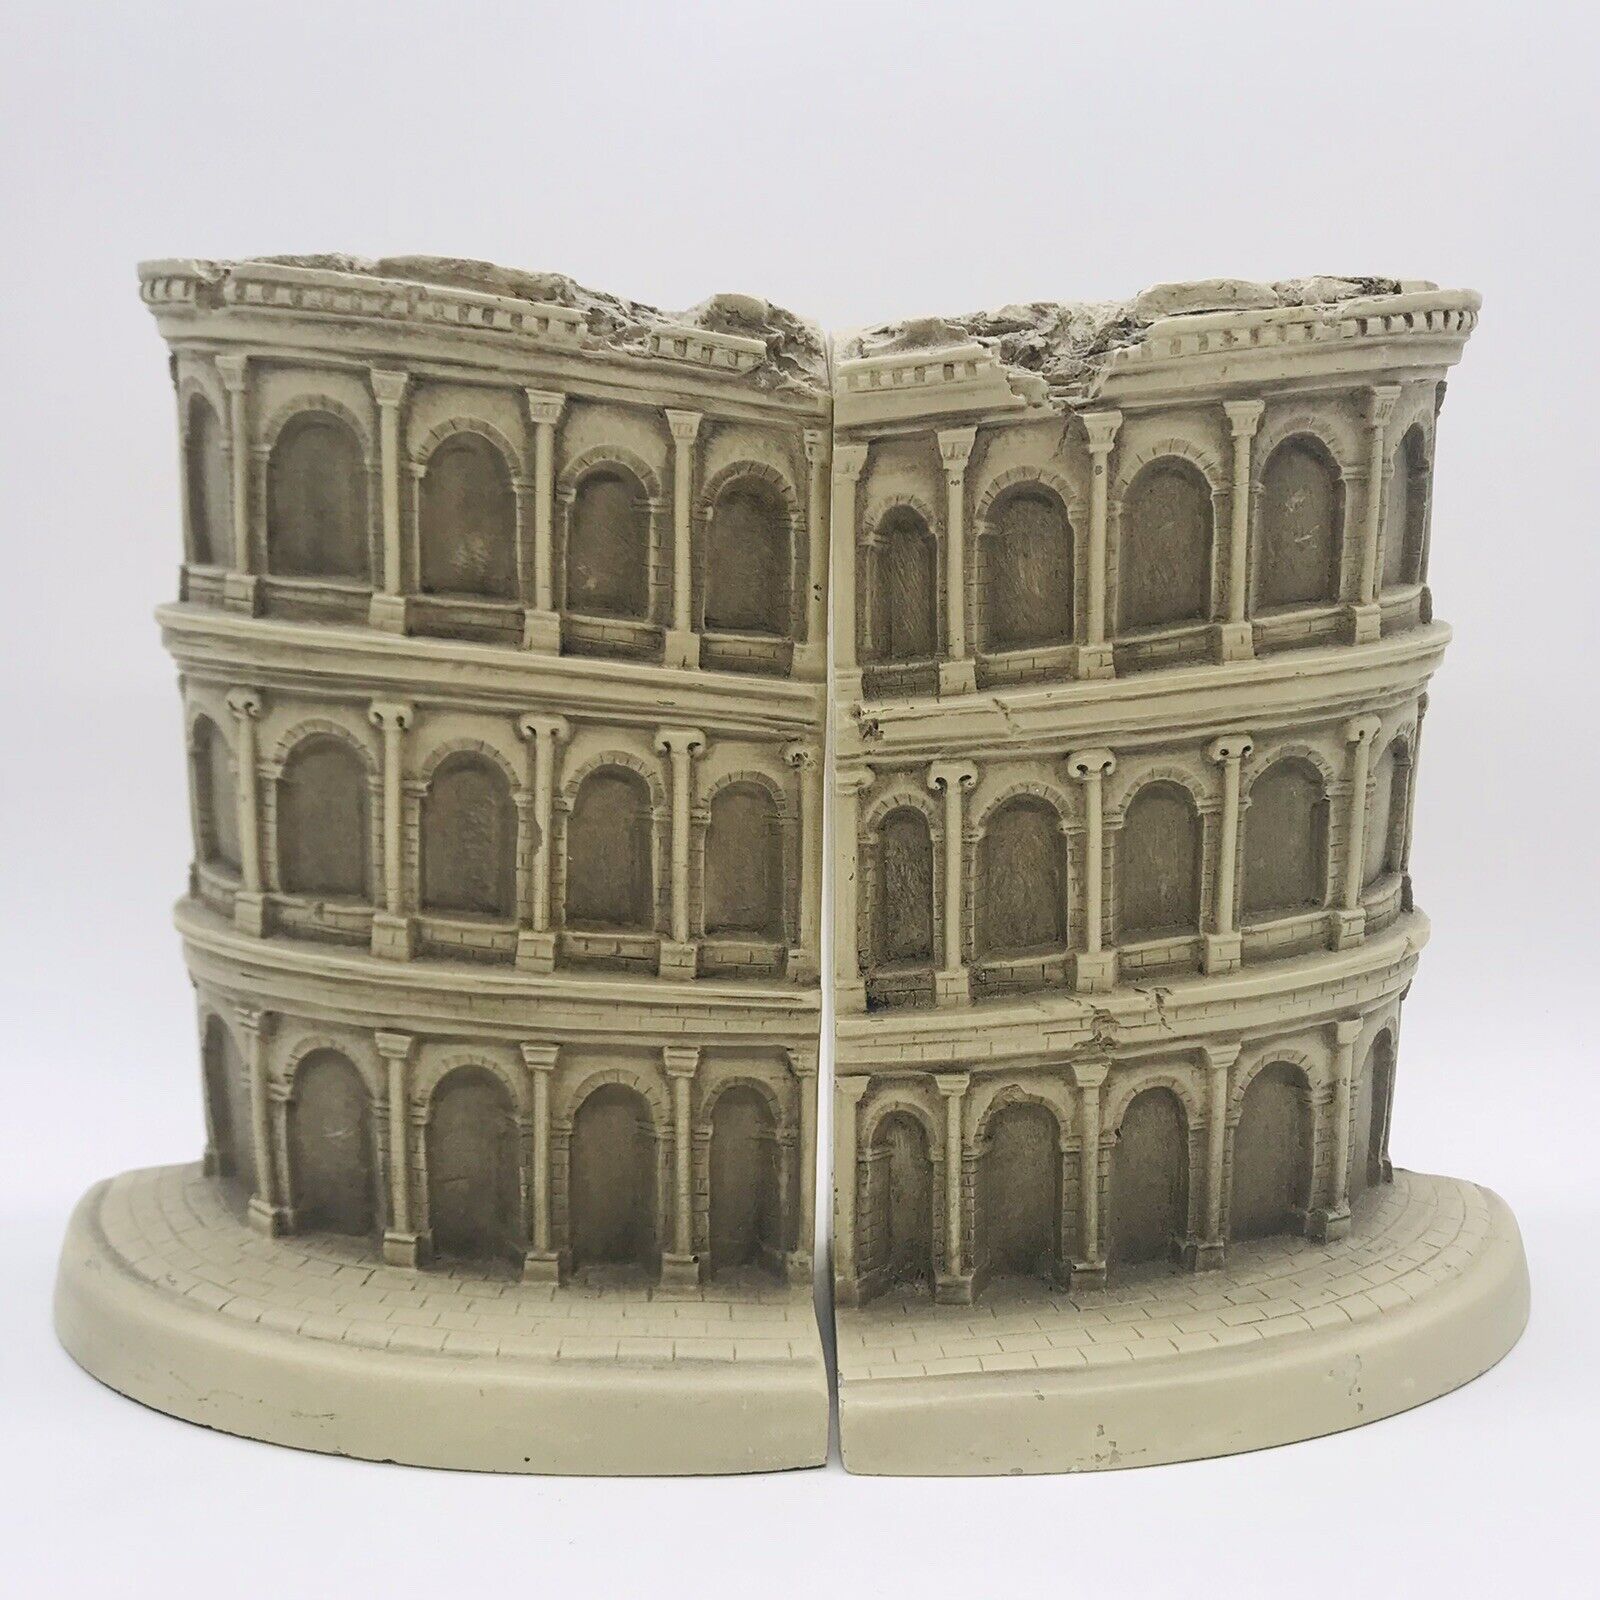 Historical Wonders TMS Set of 2 Bookends 2002 The Colosseum Rome Italy 